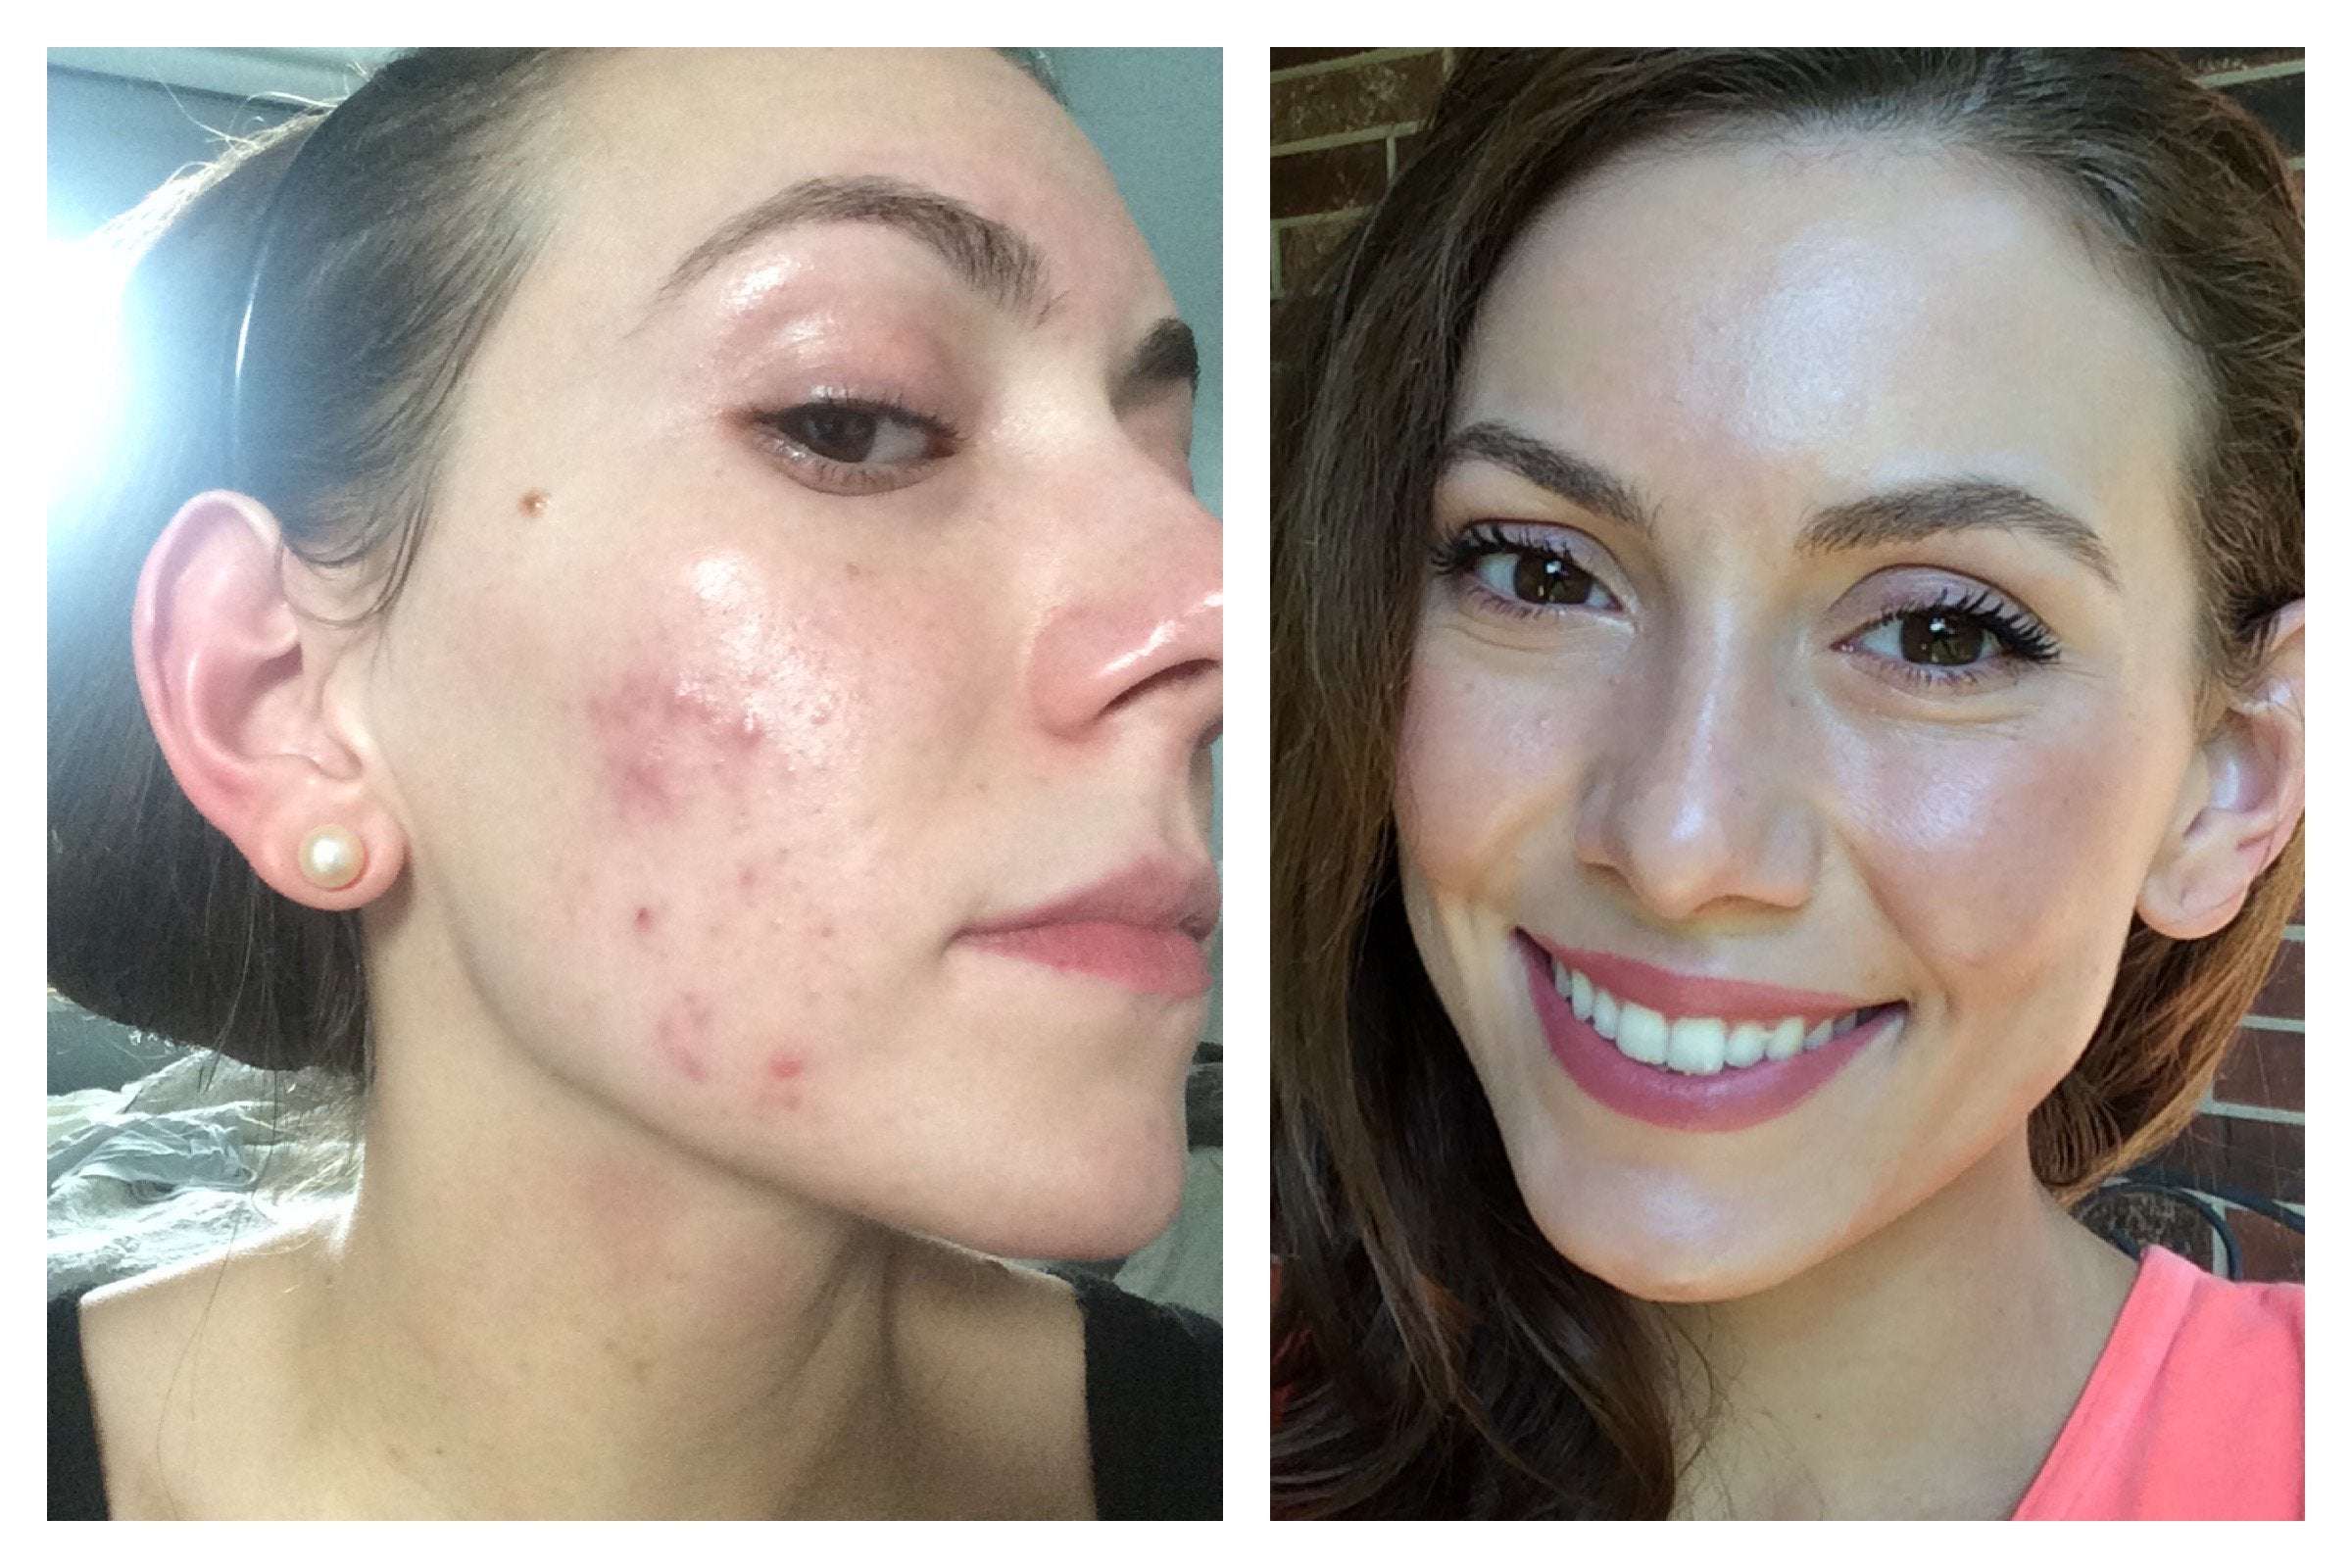 [Before&After] 6 months of hormonal acne treatment later ...